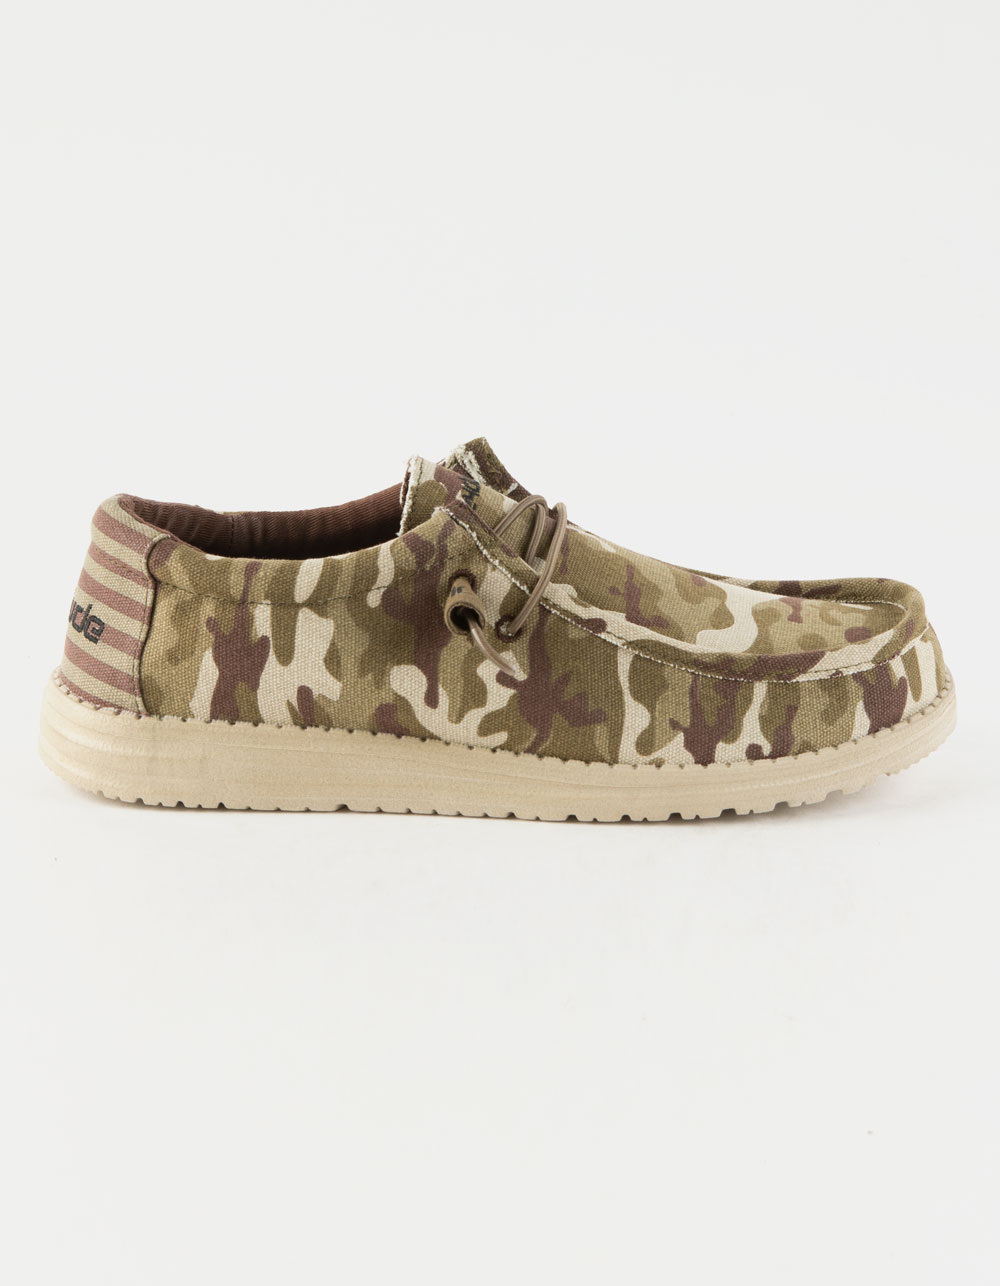 HEY DUDE Wally Mens Shoes - CAMO | Tillys